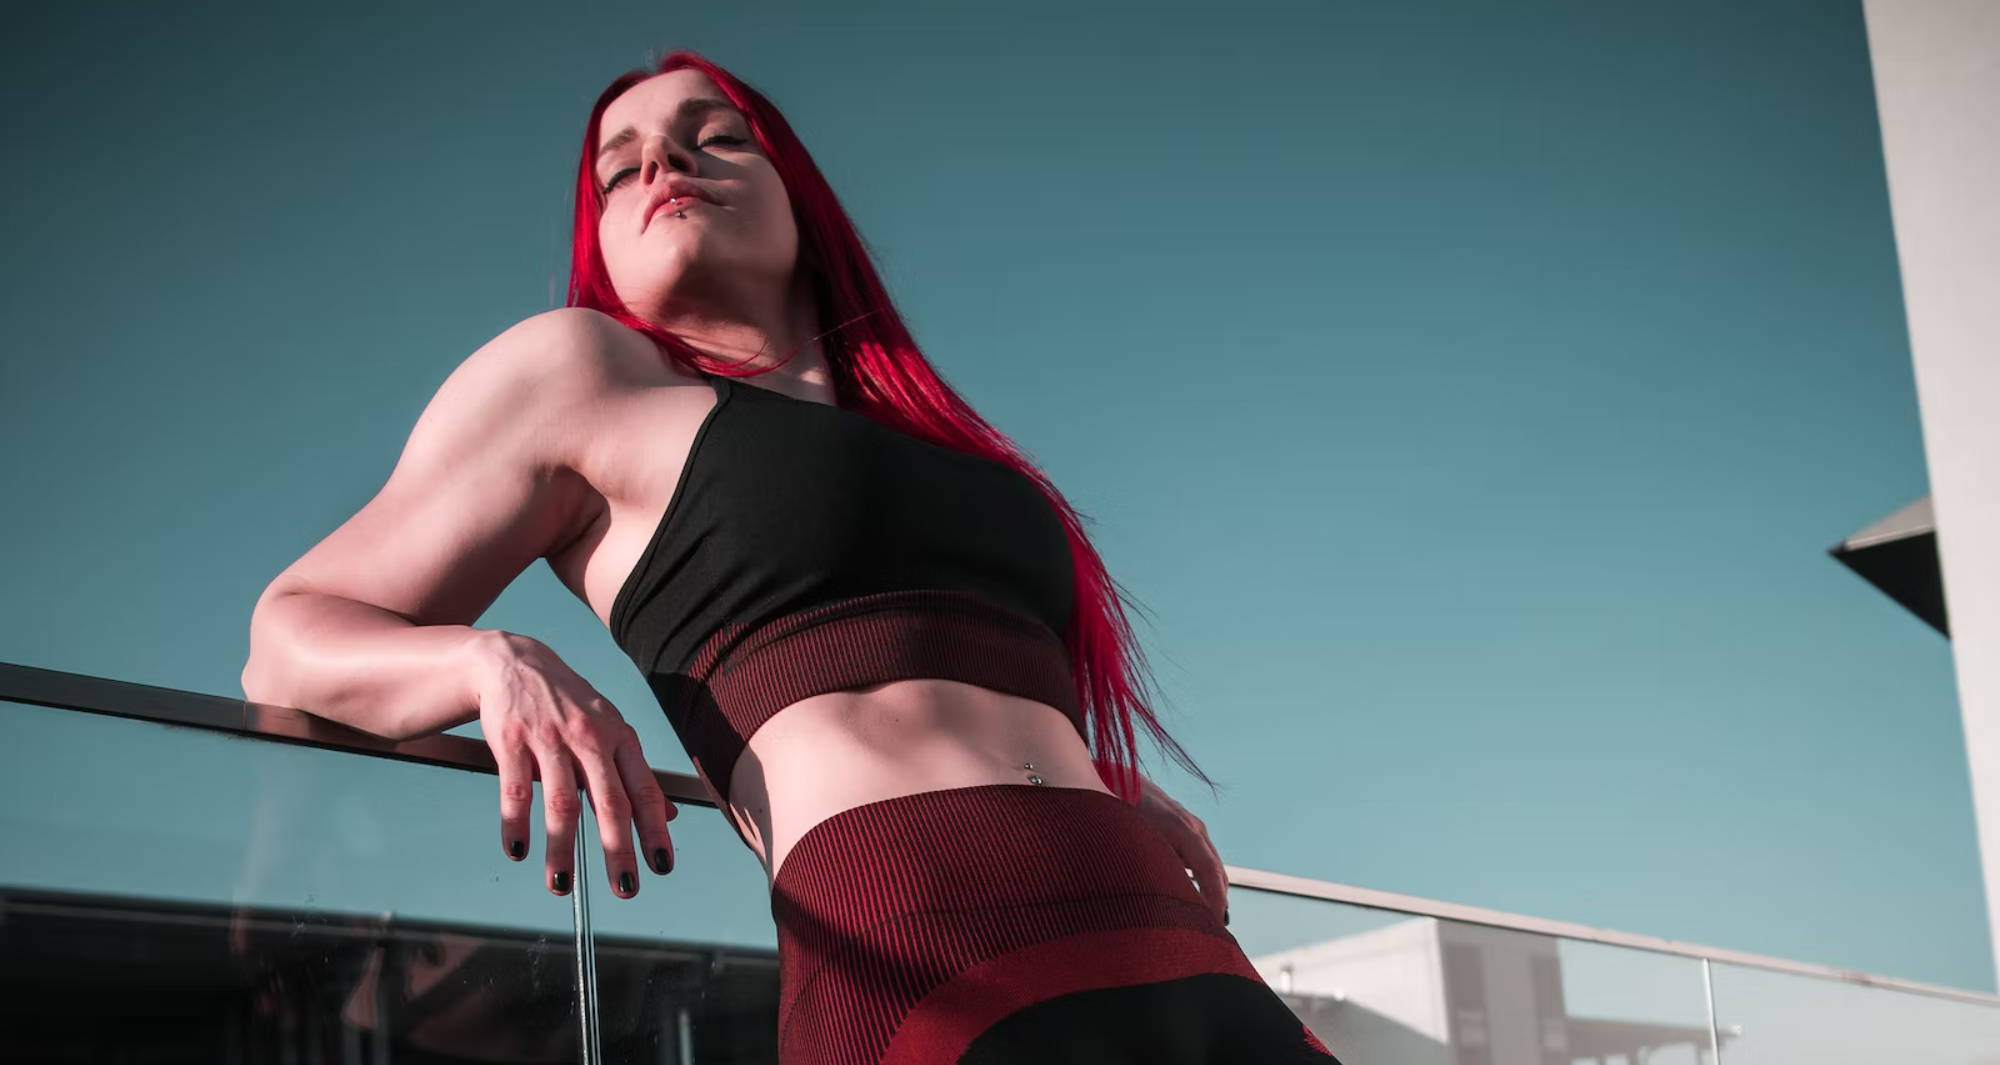 red haired woman wearing an all black and red spandex outfit